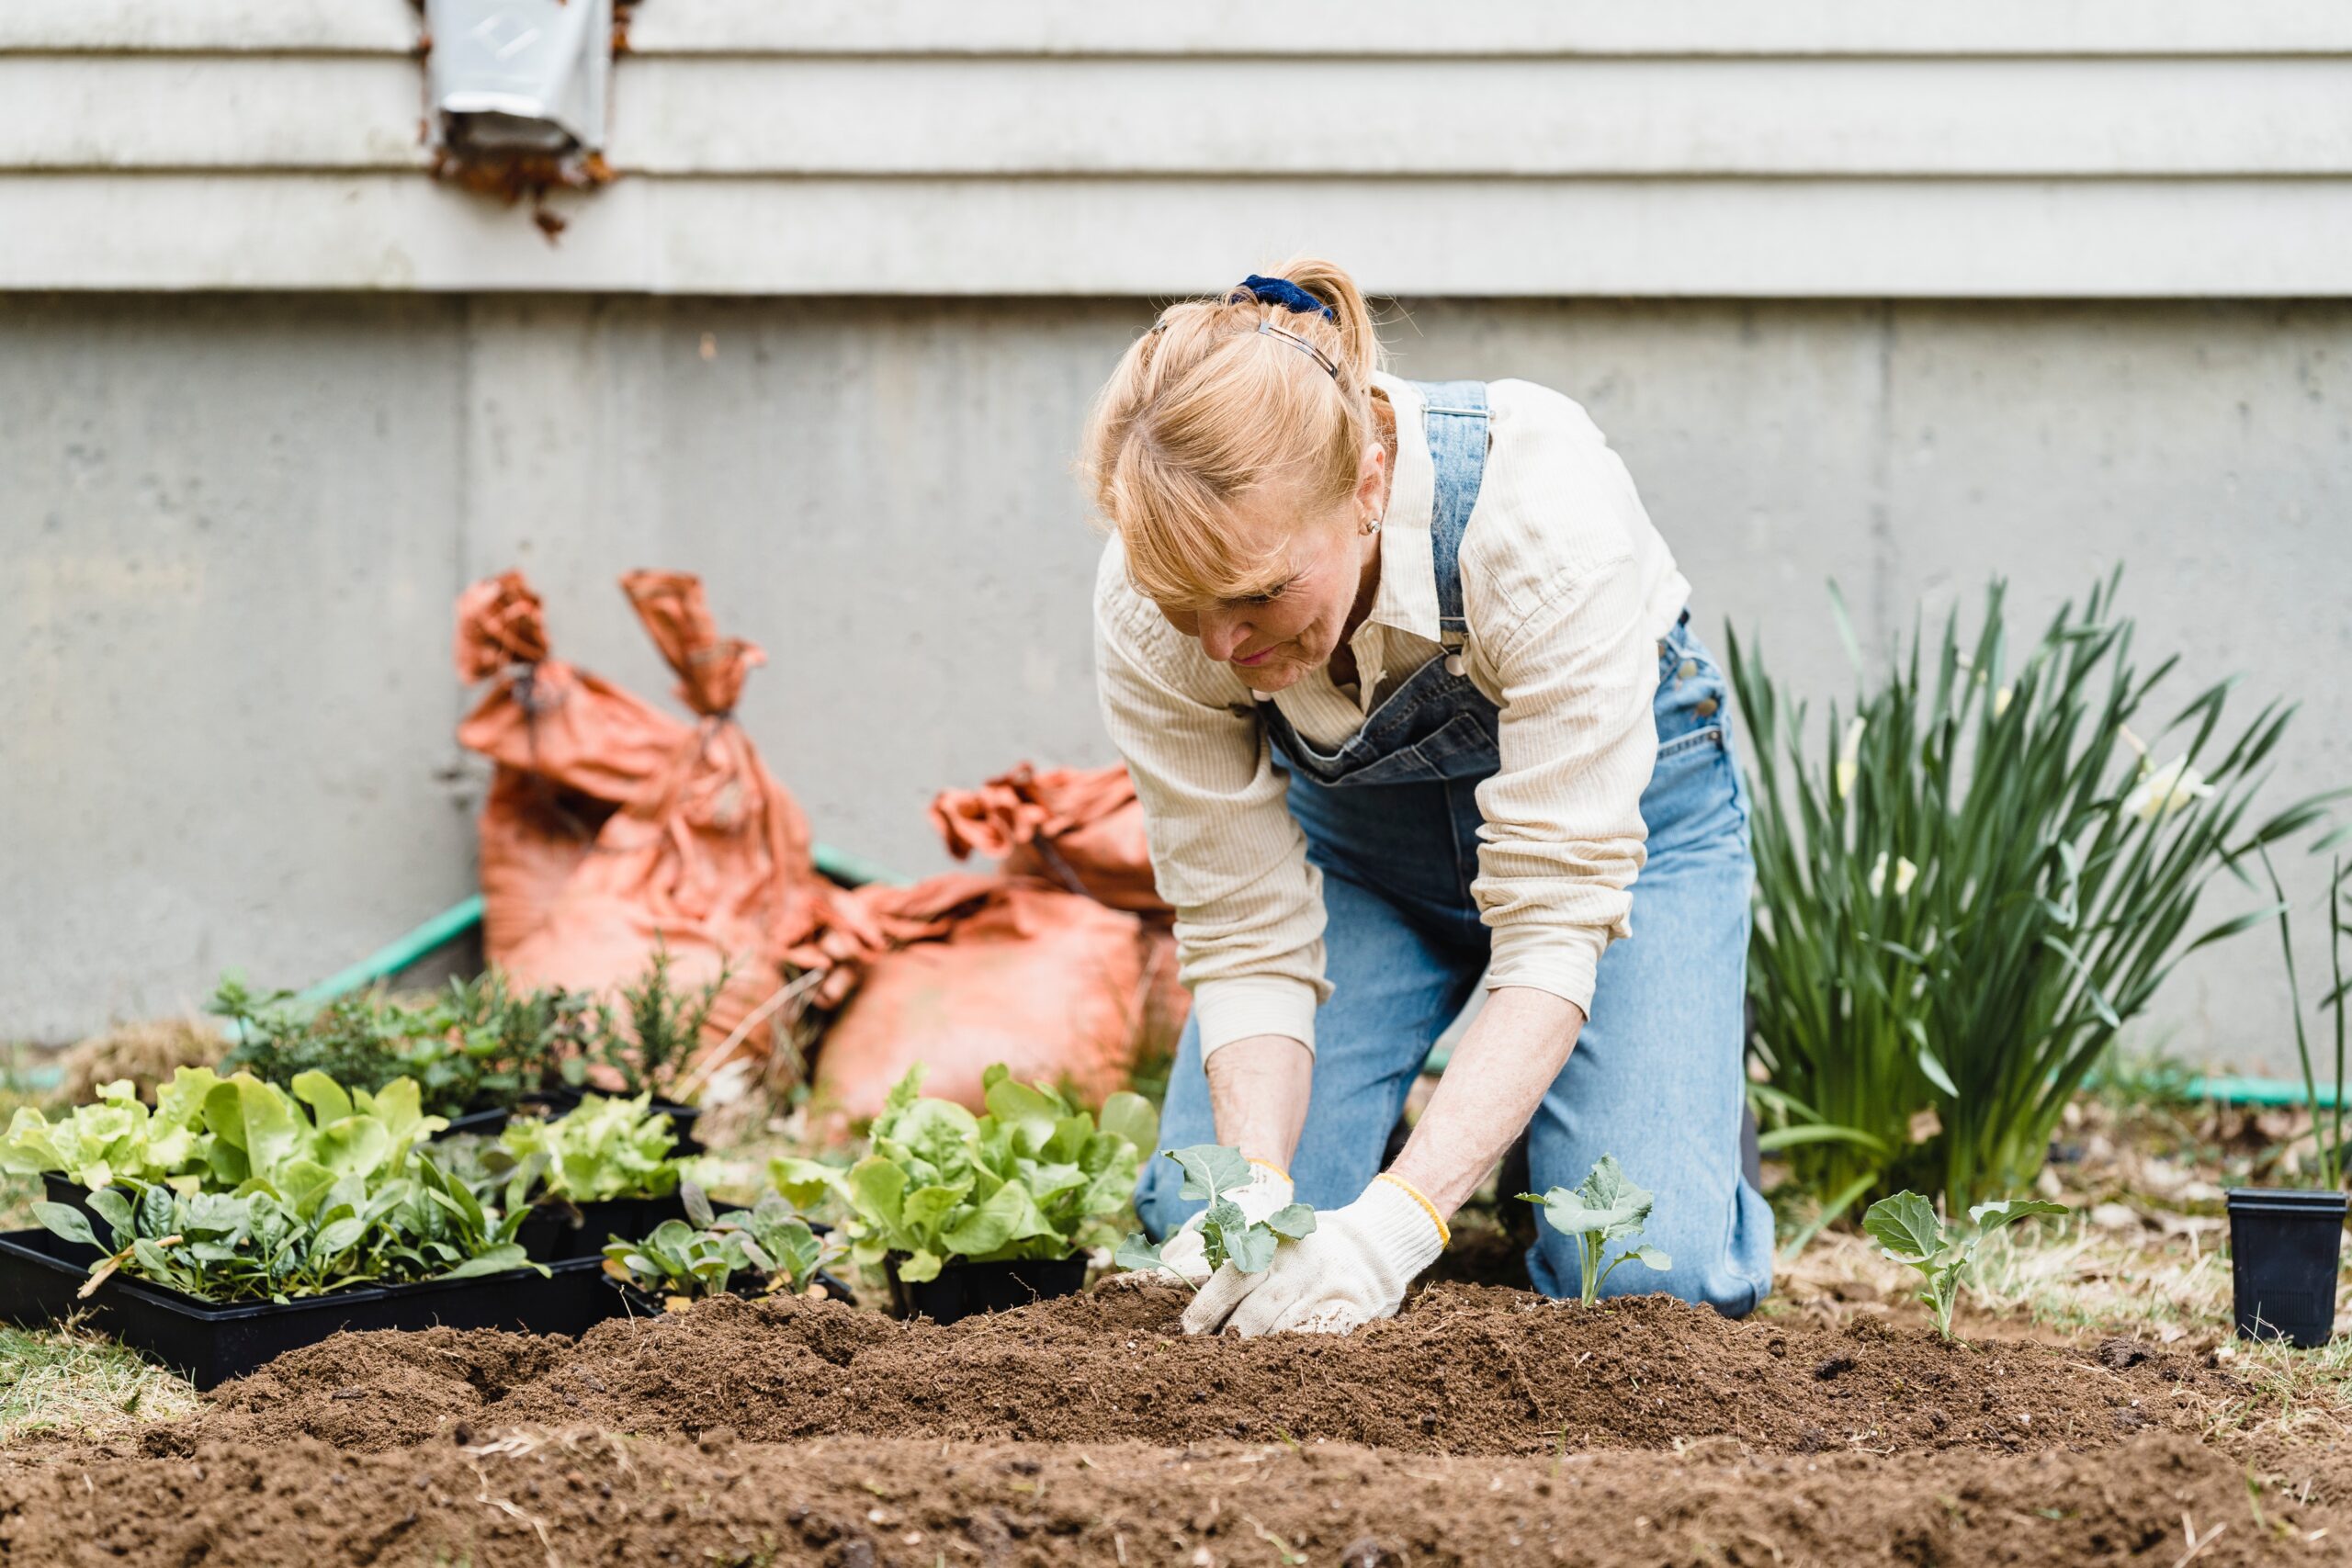 Woman gardening in overalls, working with soil